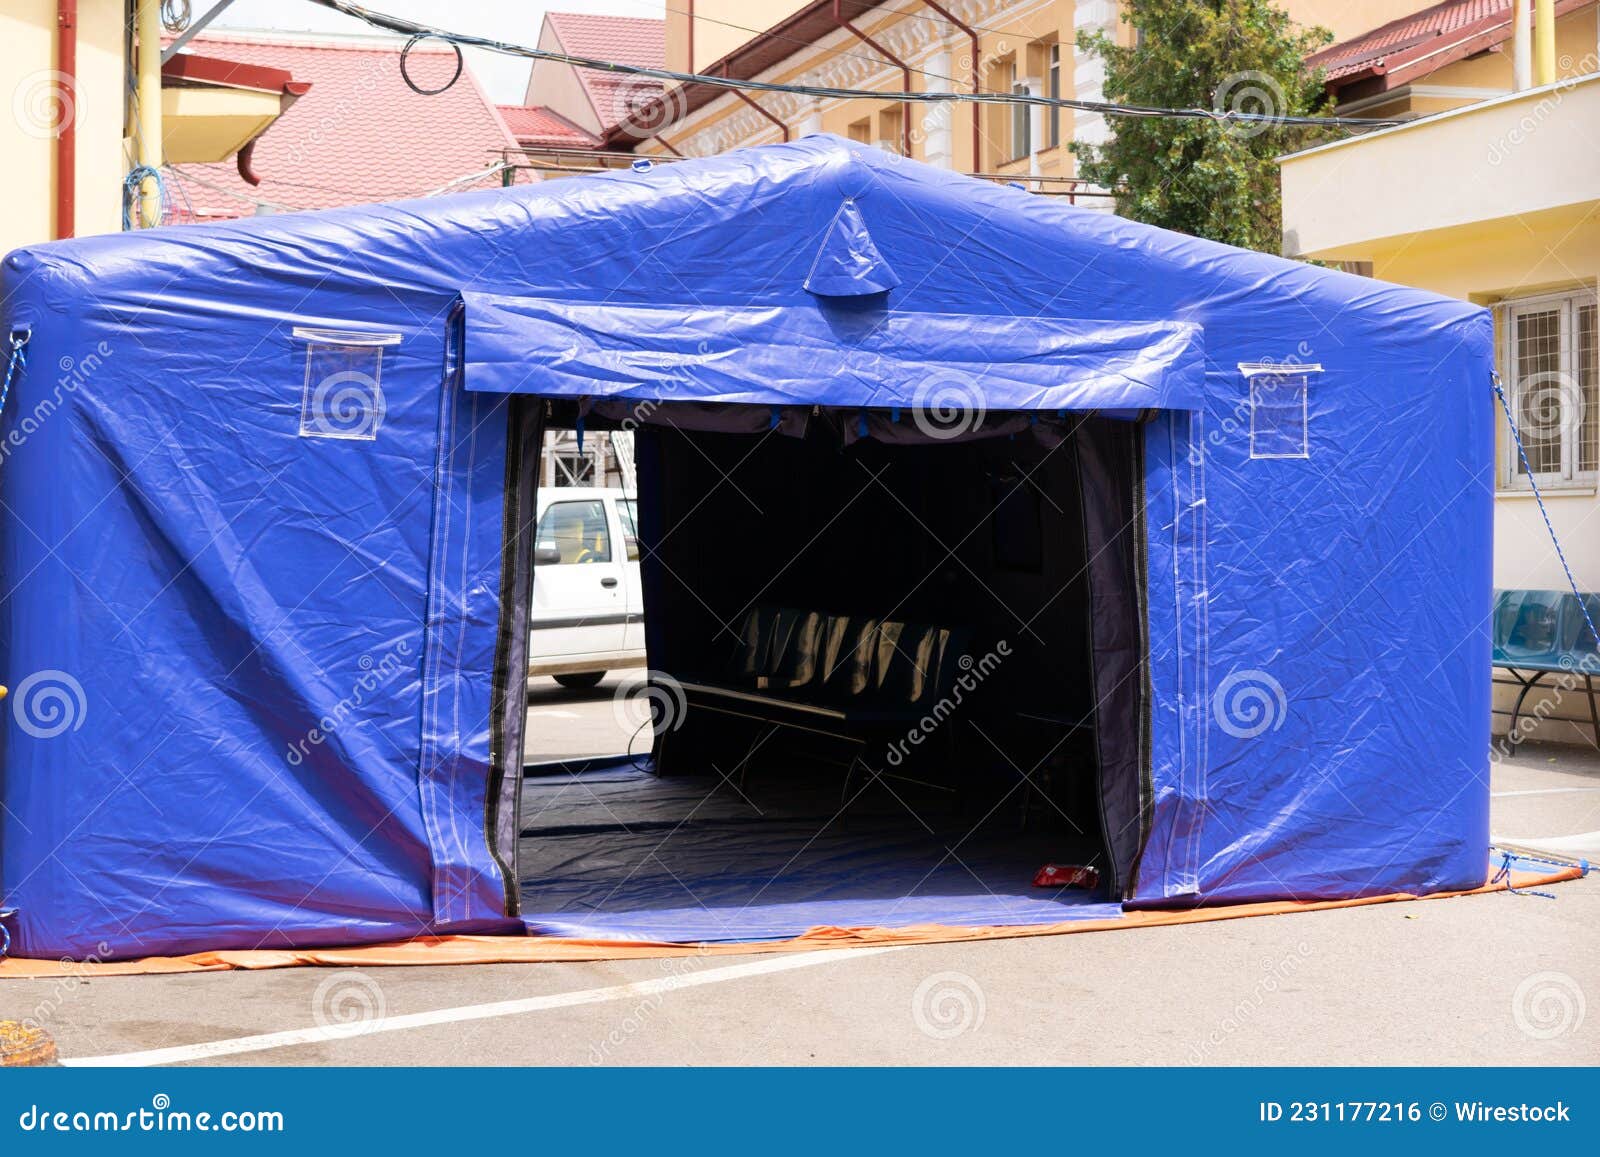 empty hospital triage tent entrance for covid 19 pandemic